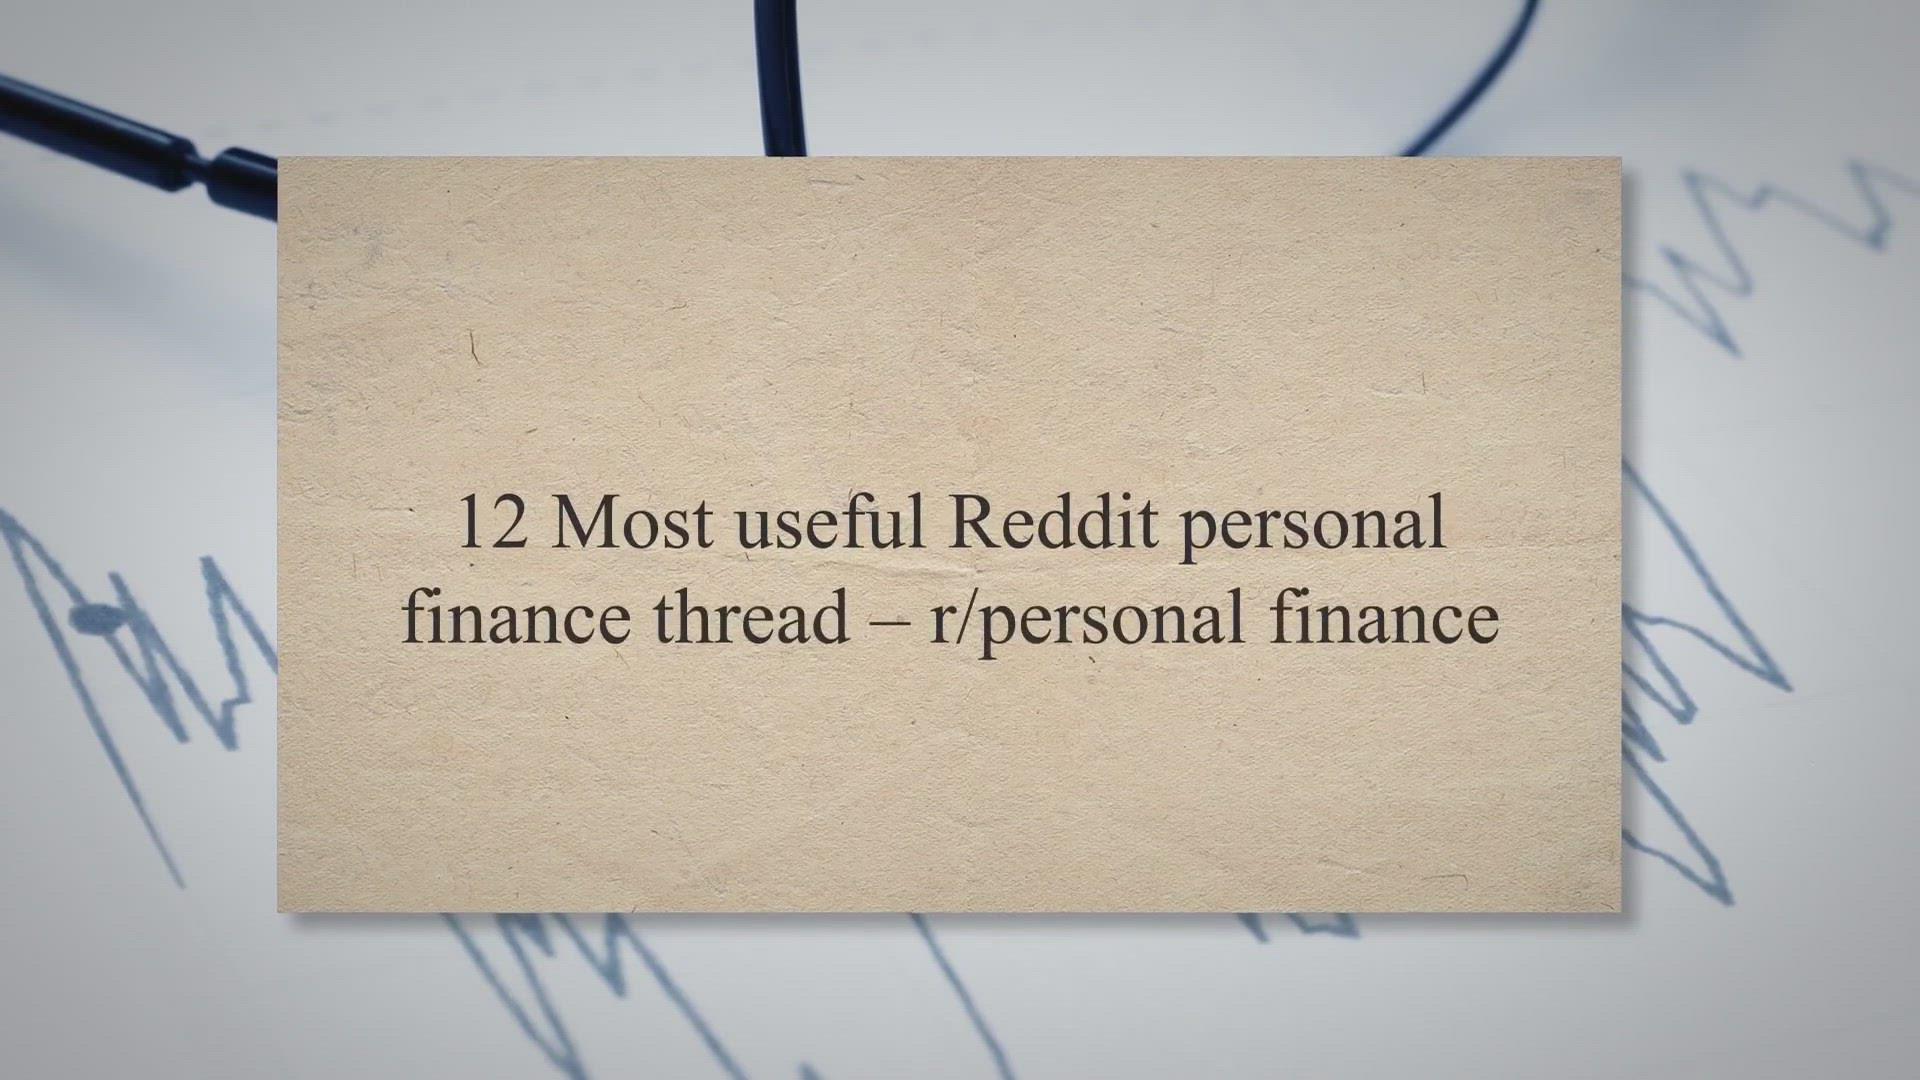 'Video thumbnail for 12 Most useful Reddit personal finance thread – r/personal finance'